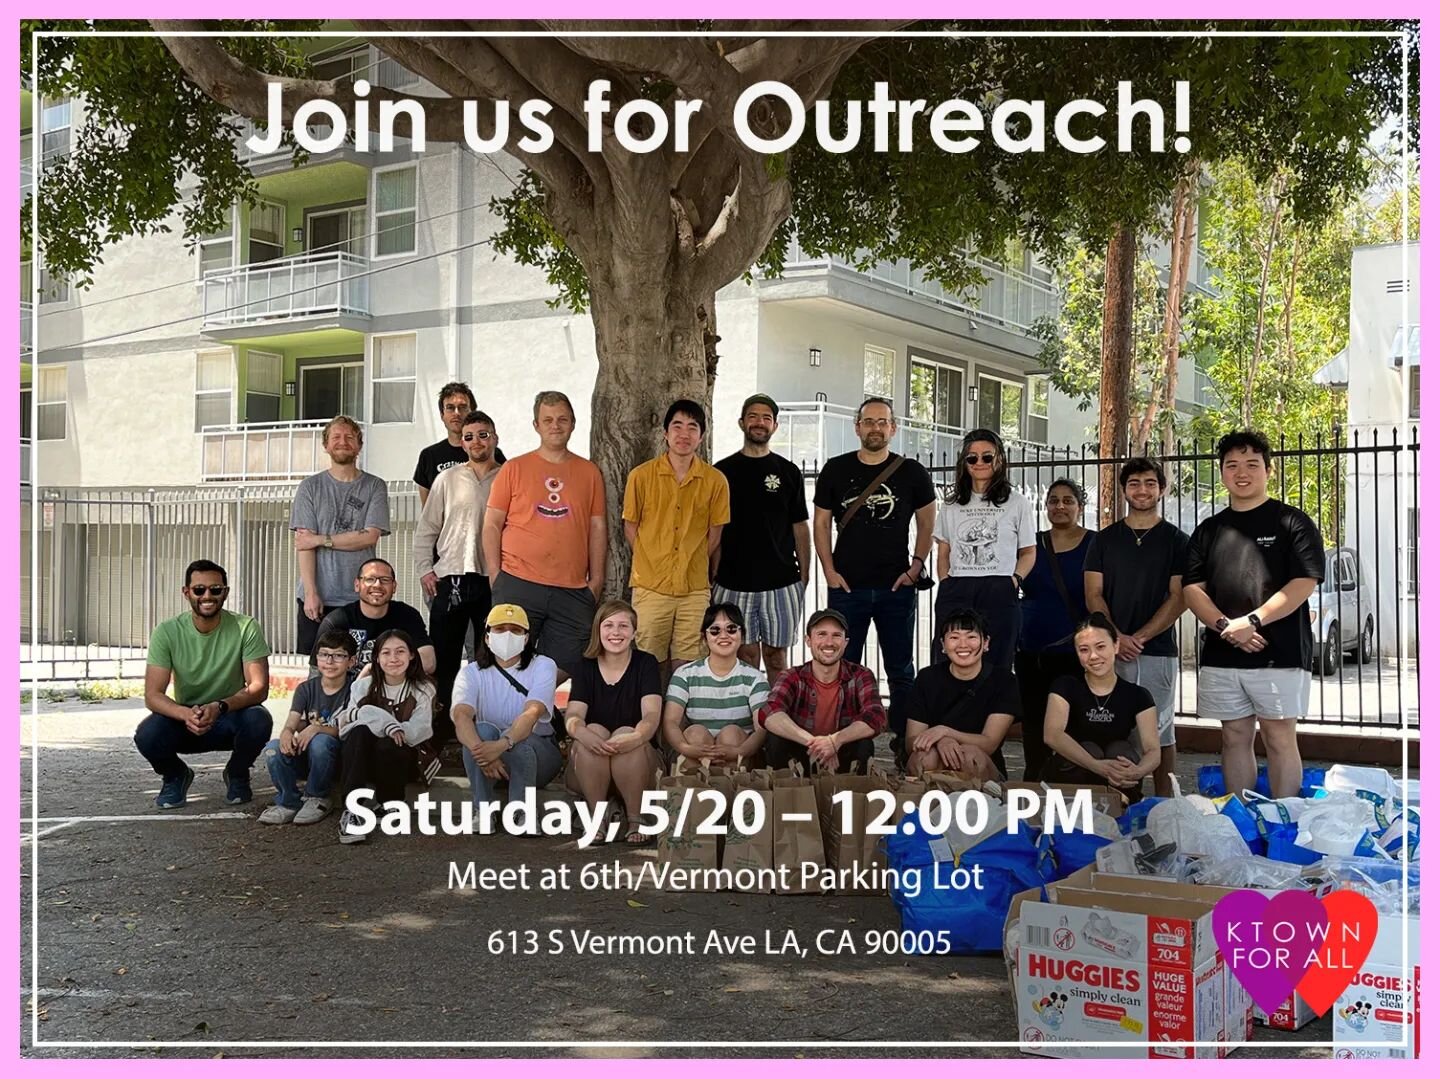 **note that our usual meeting place is unavailable tomorrow so we will be meeting in the parking lot at 613 S Vermont Ave**

Join us for outreach tomorrow! We always go over best practices and make sure new people are in groups with experienced volun